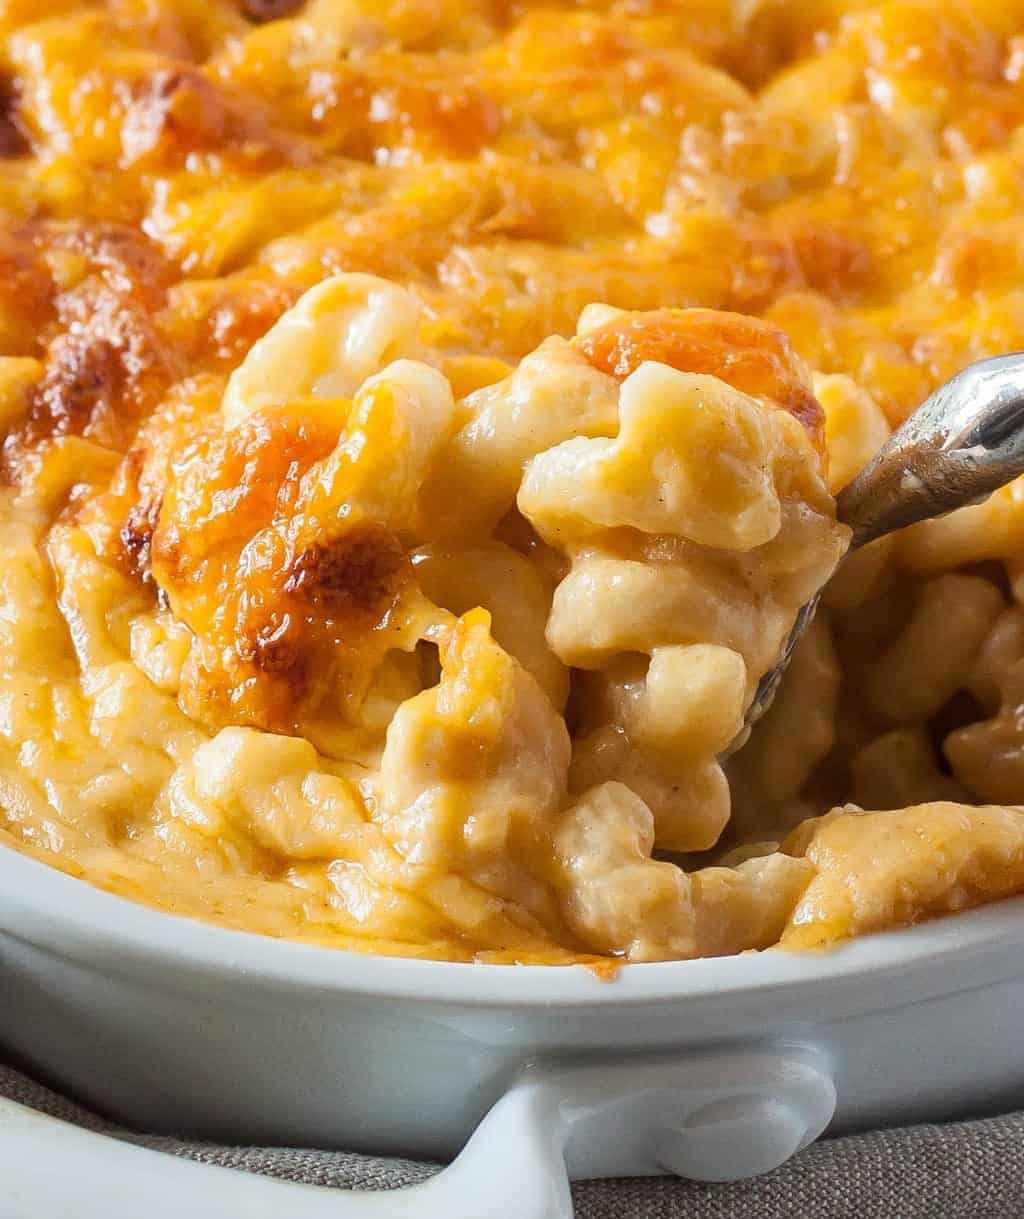 Southern Baked Mac and Cheese Recipe - the Best! - Chenée Today